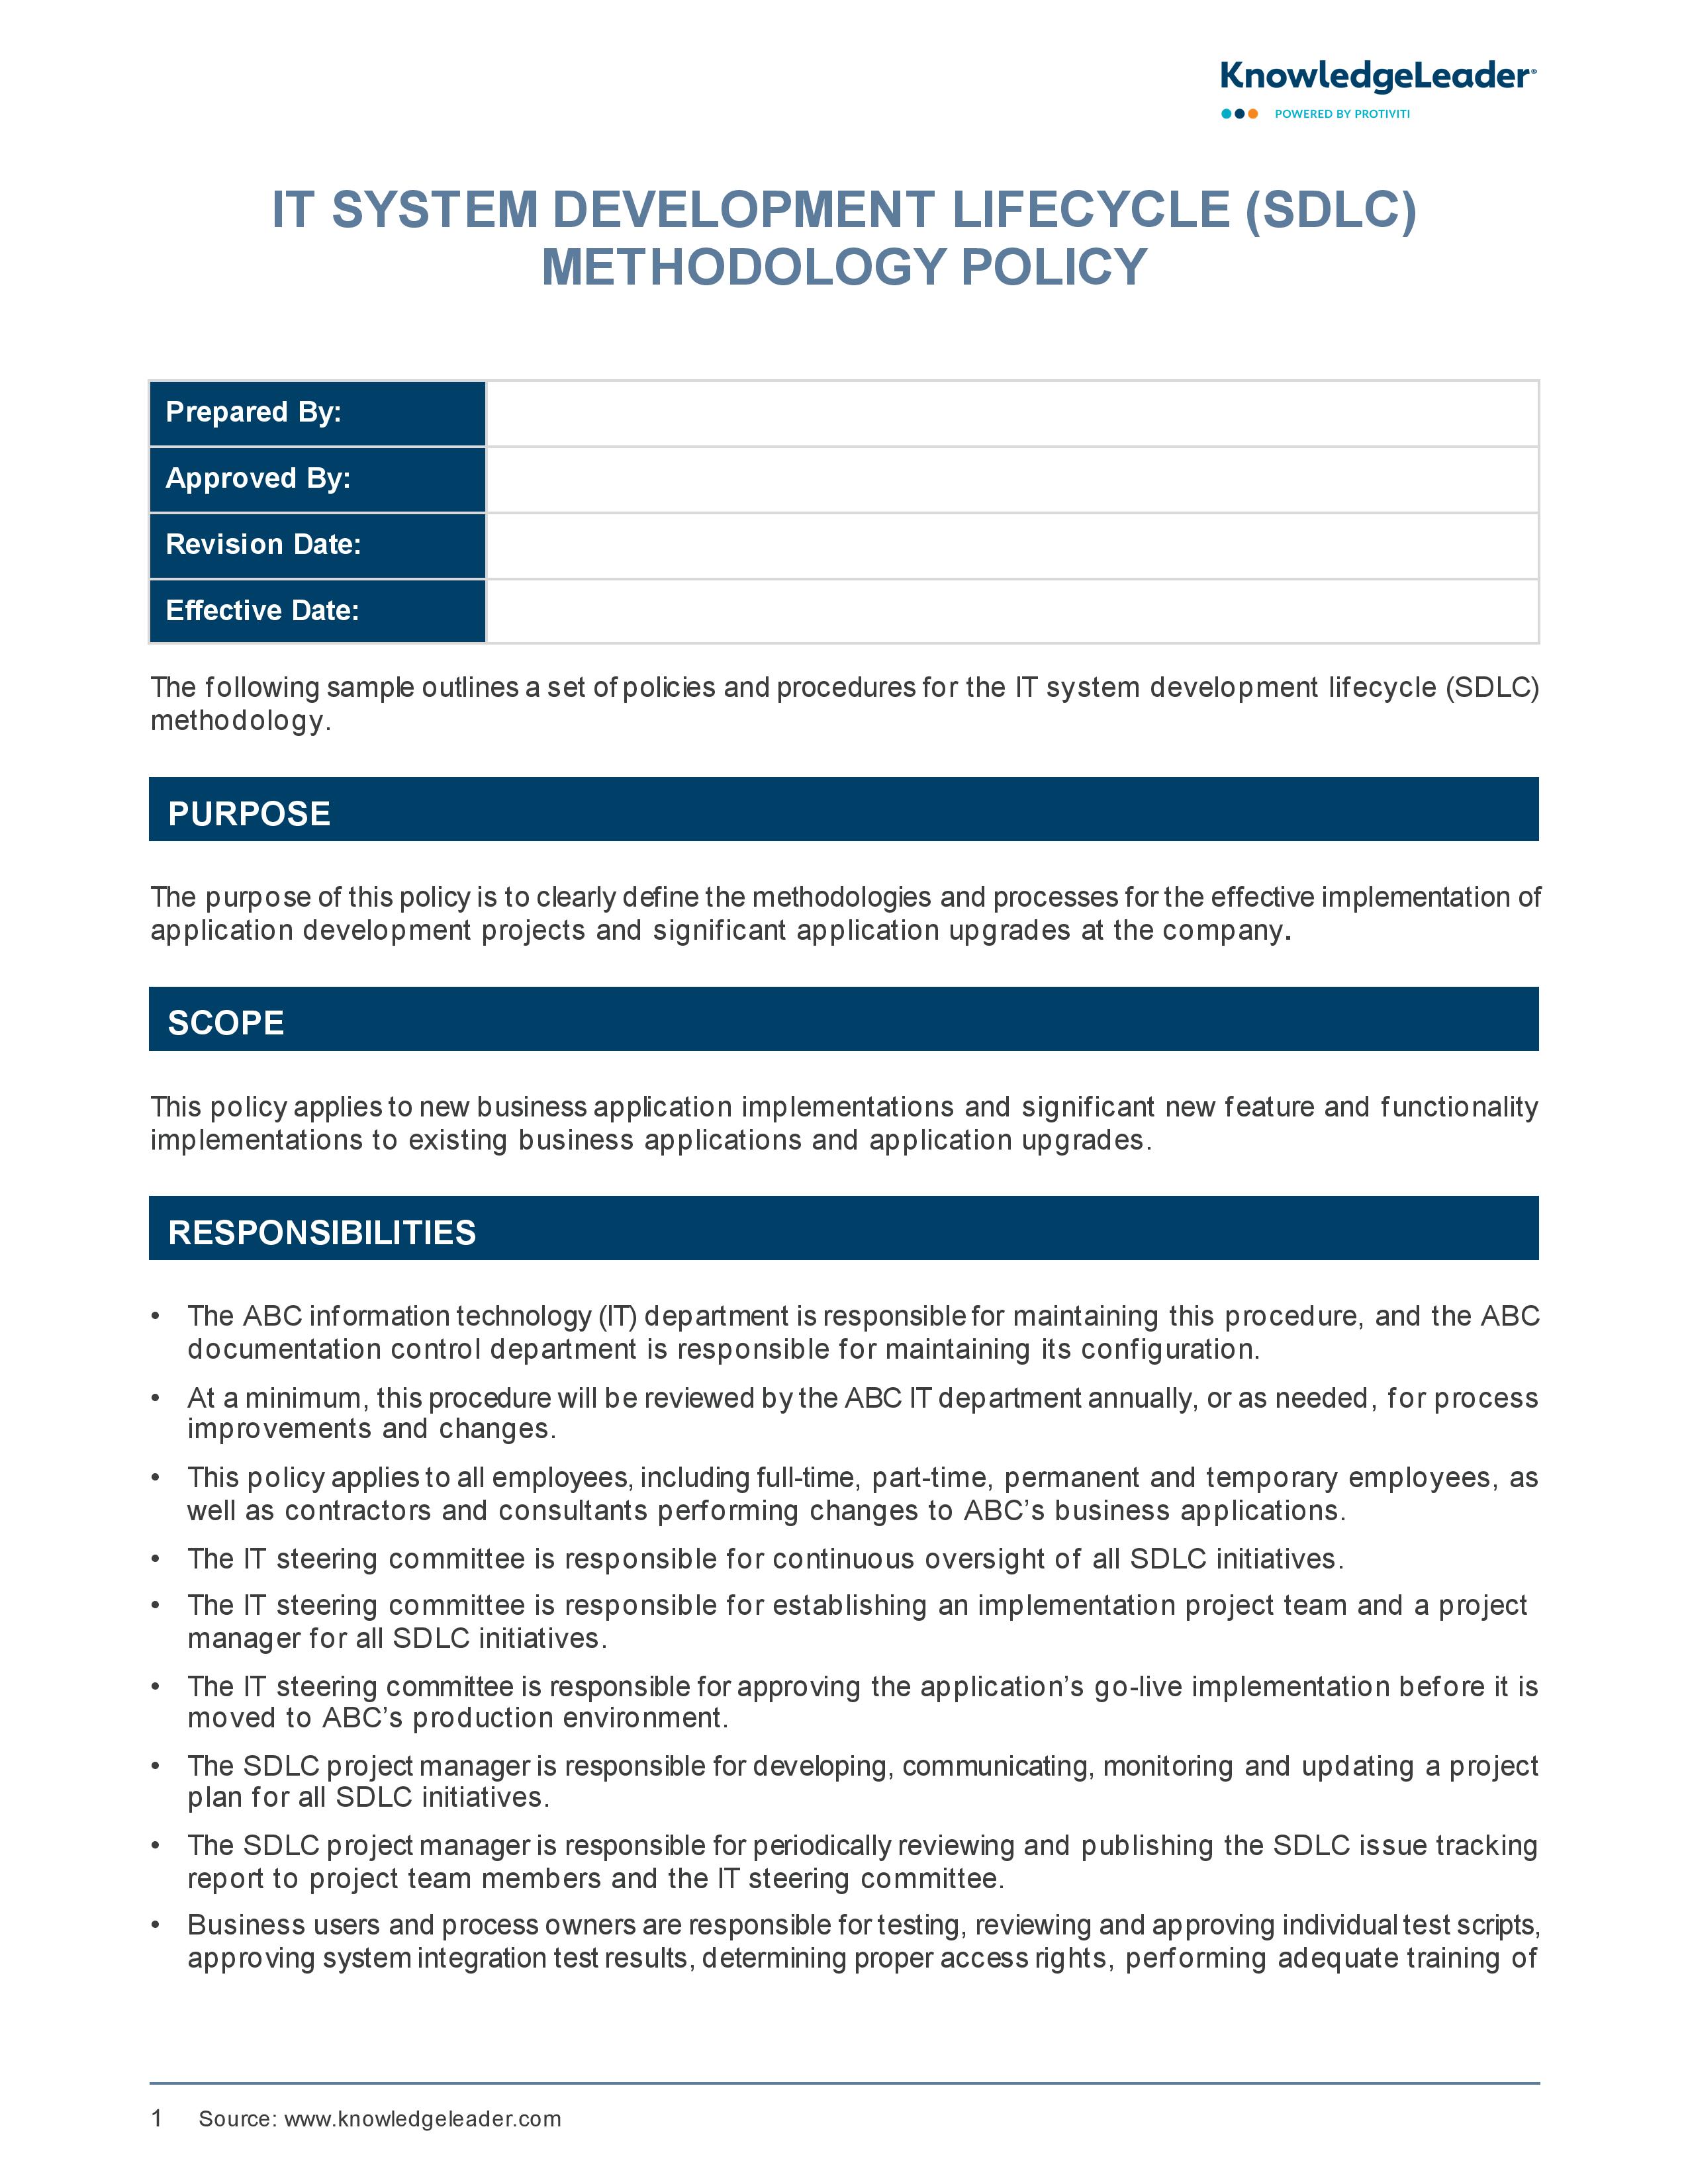 screenshot of the first page of IT System Development Life Cycle Methodology Policy